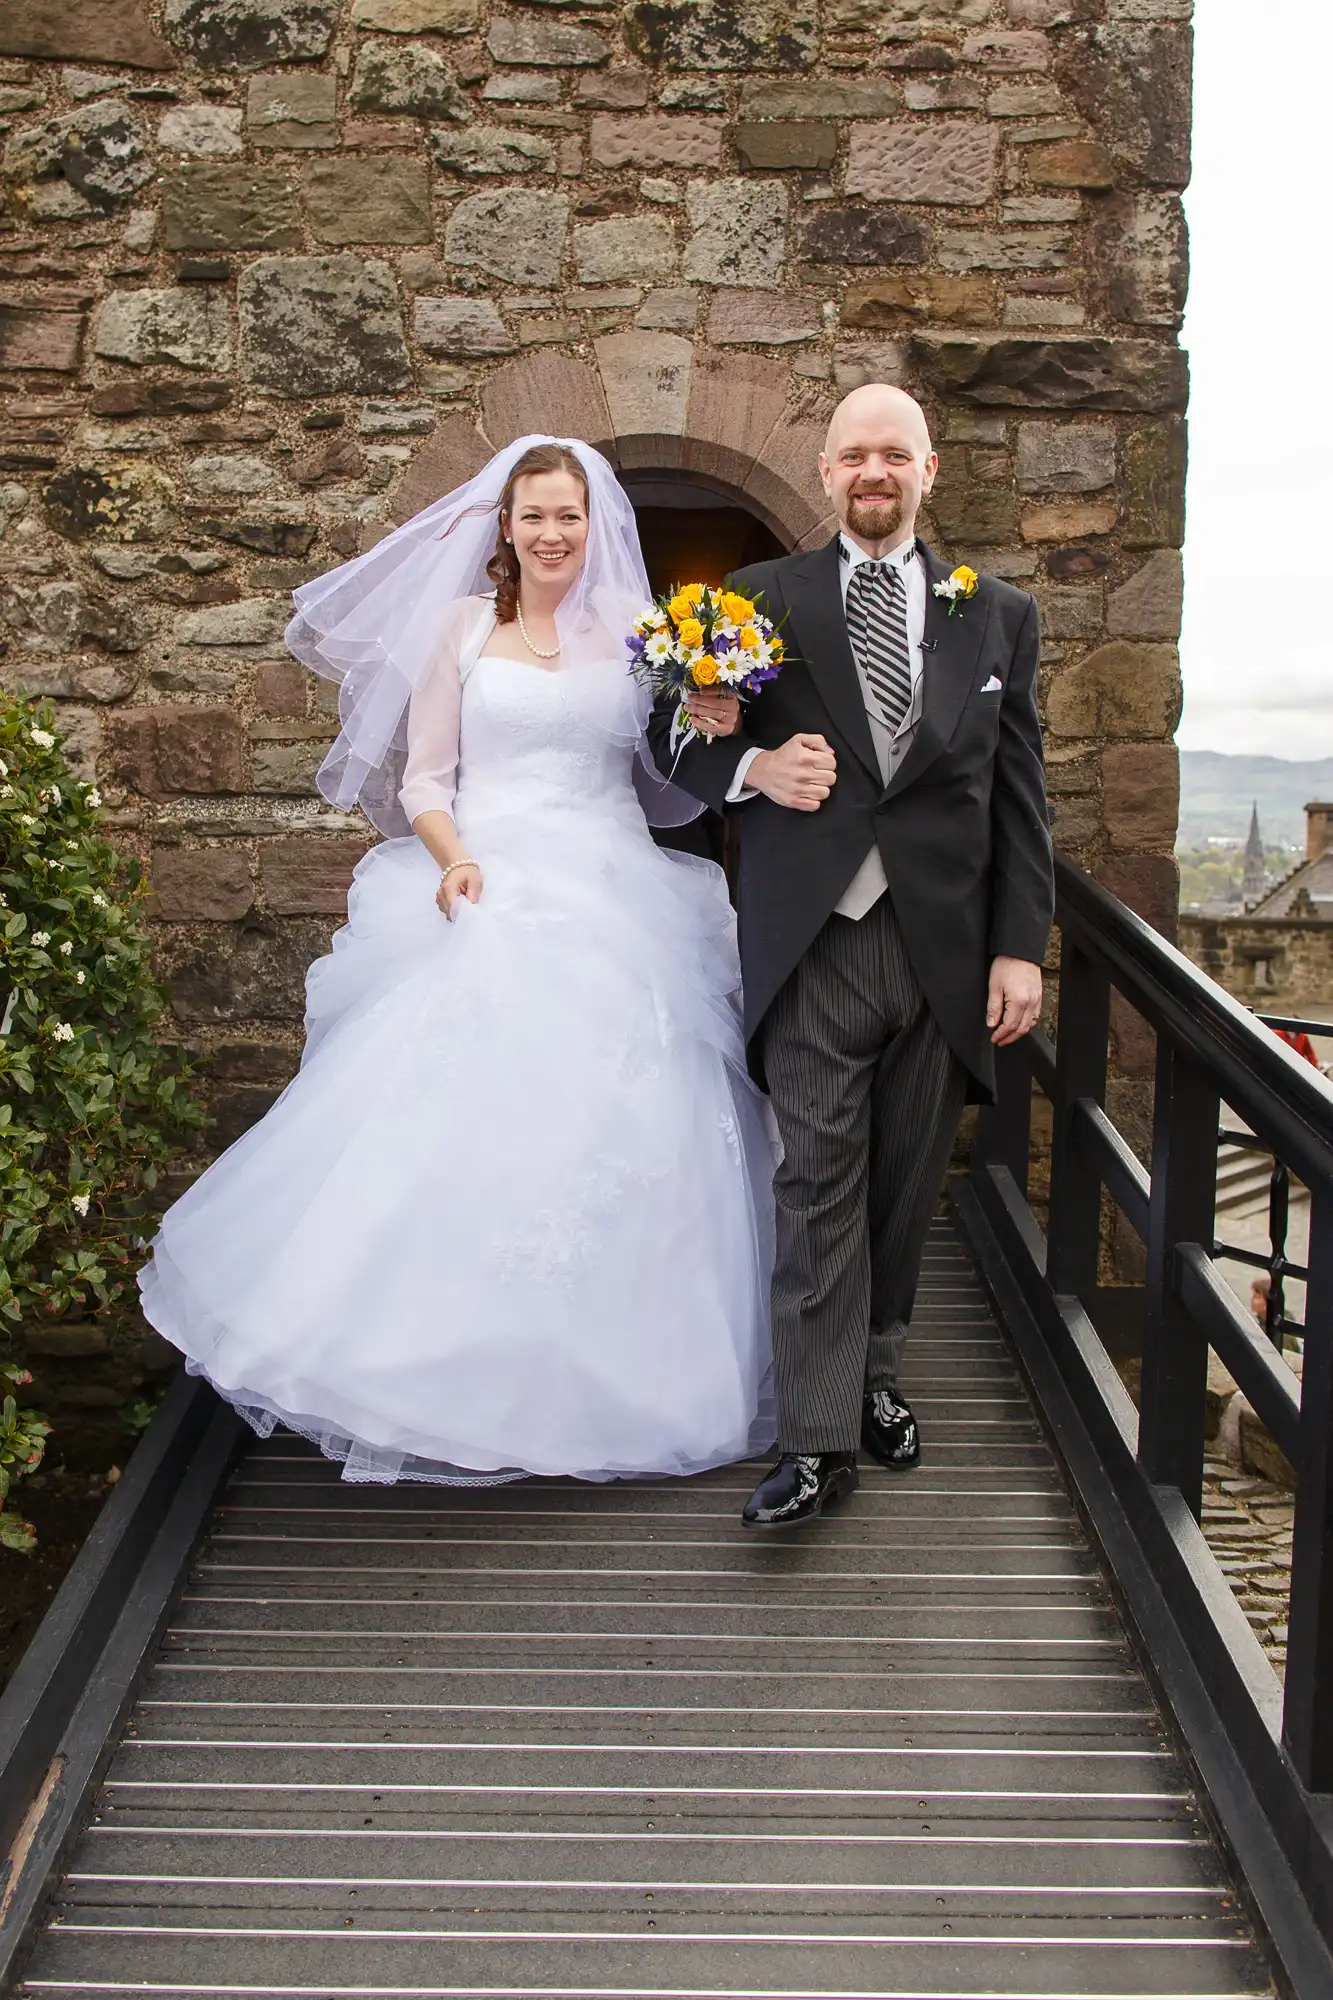 A smiling bride and groom walking down stairs, the bride in a white gown and veil and the groom in a gray suit, holding hands and a bouquet of colorful flowers.